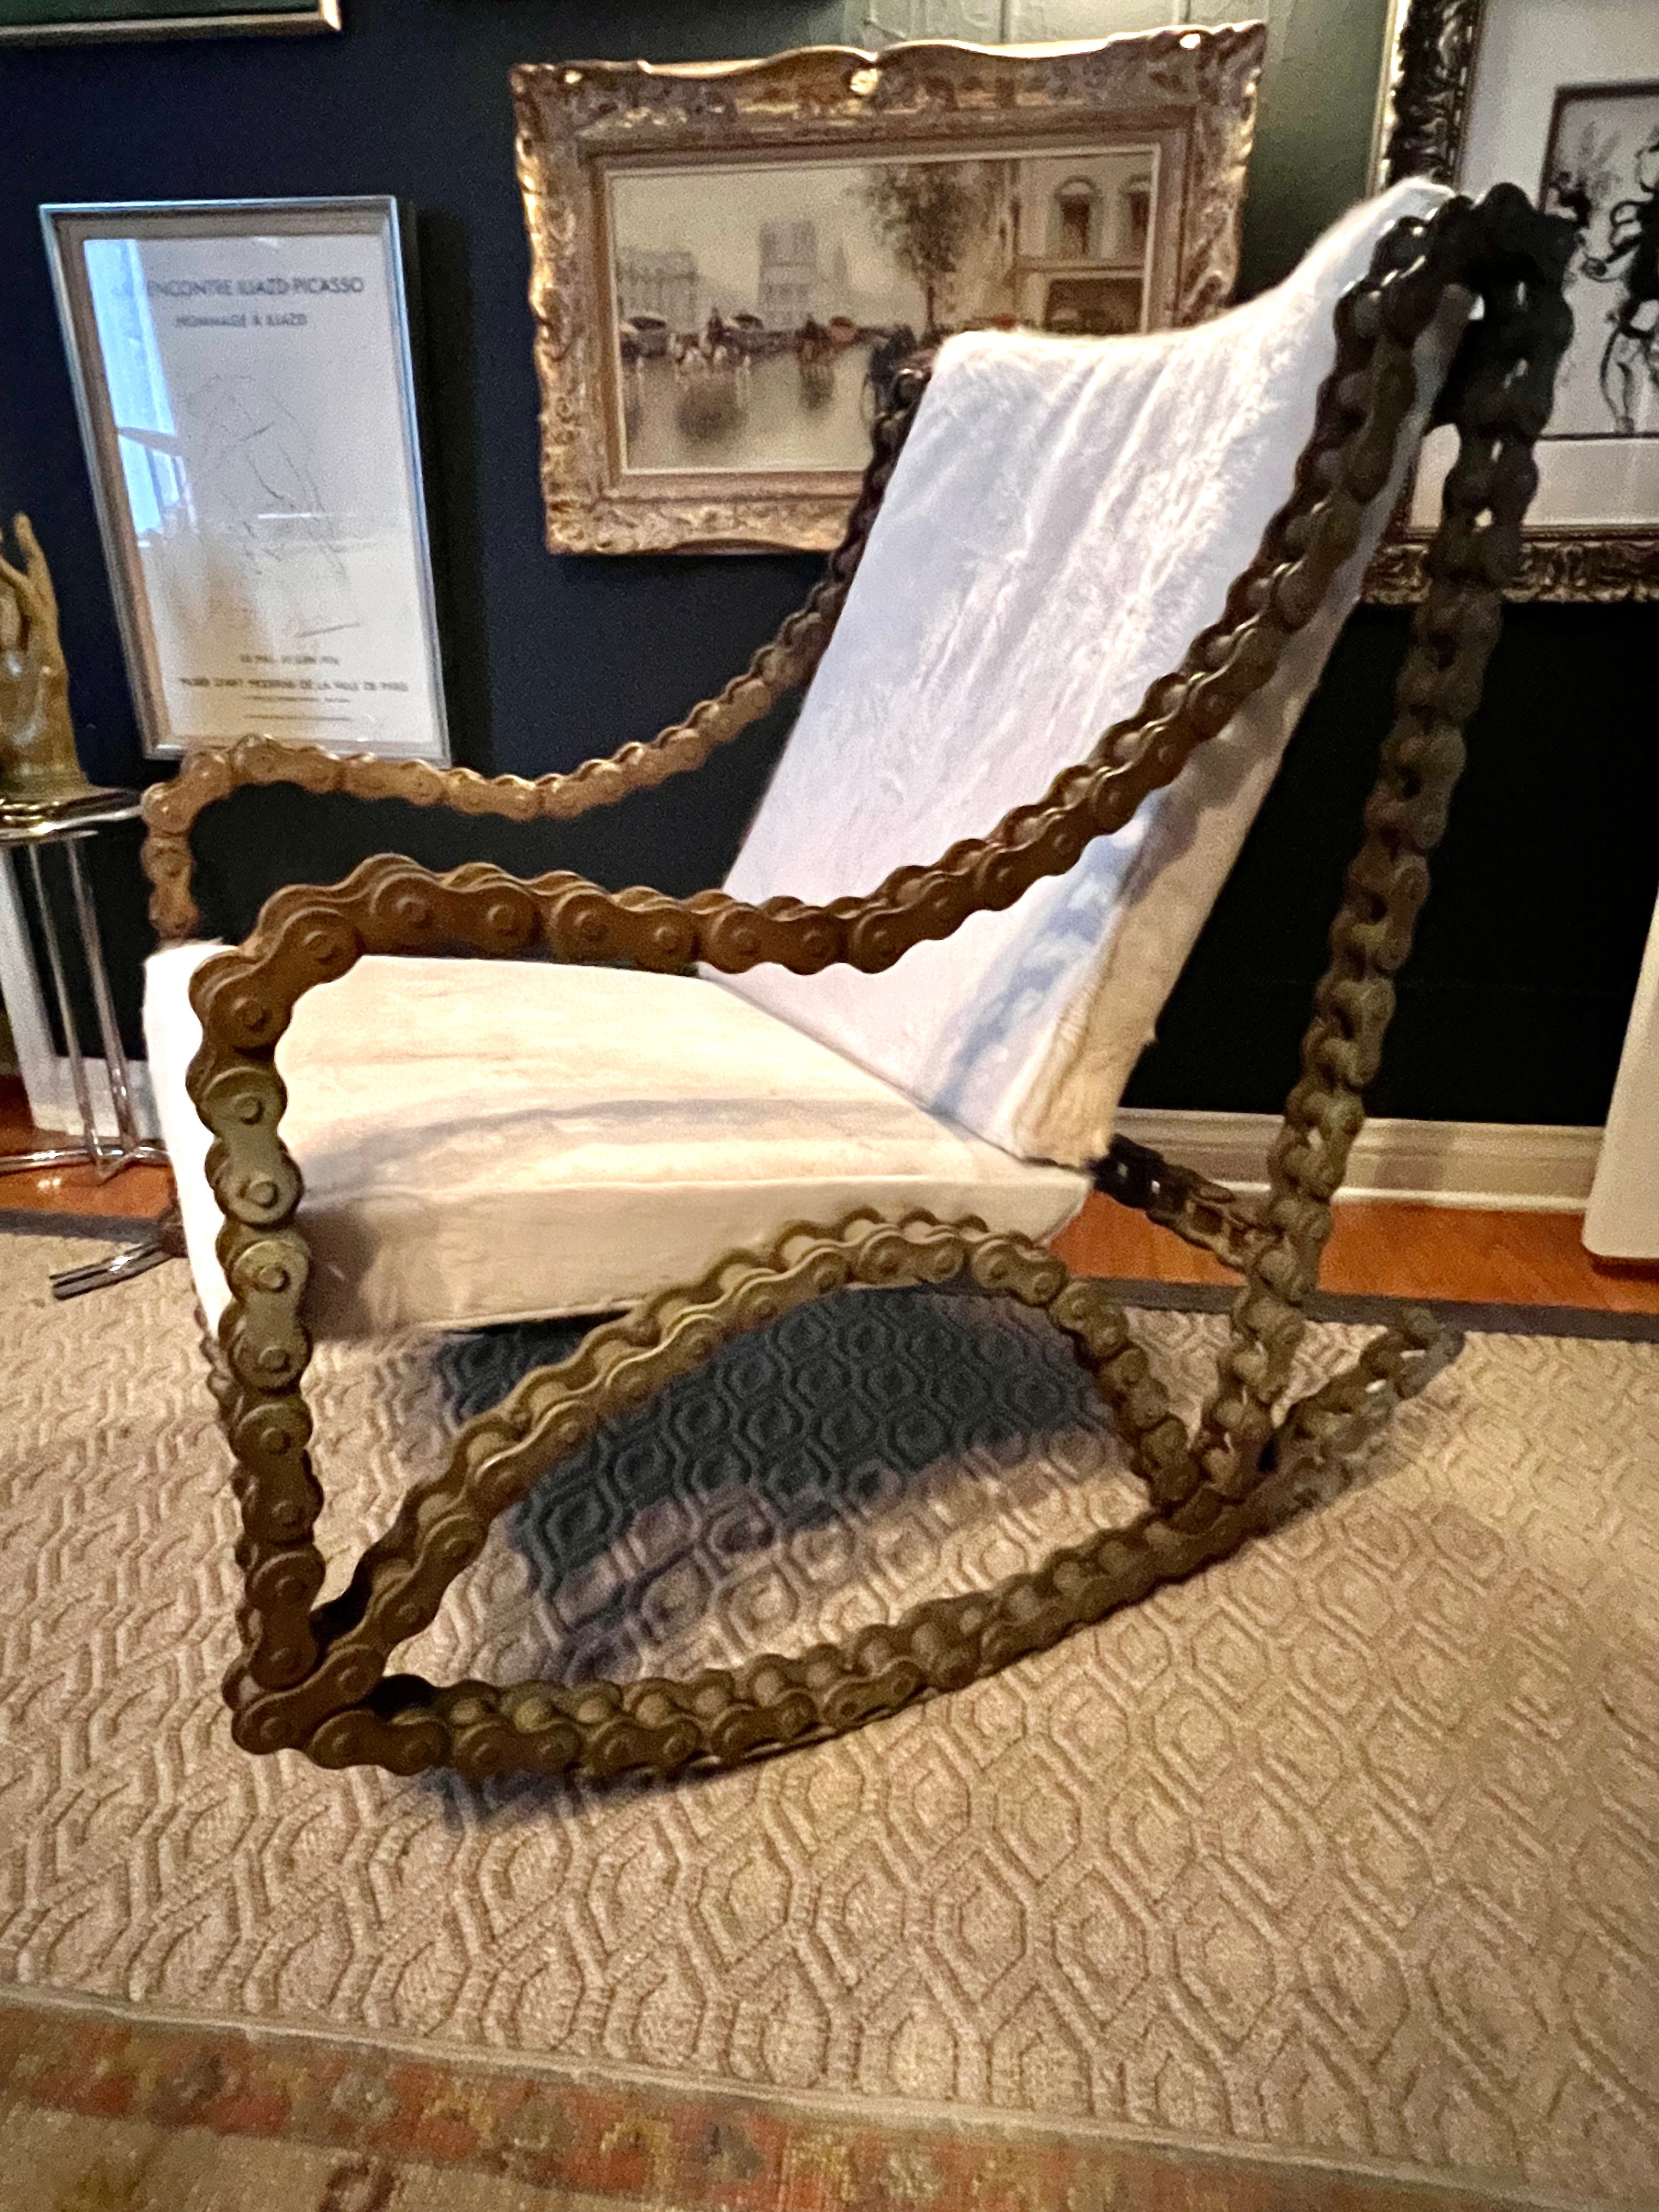 A Art piece that is functional - the piece is comprised of Industrial Chain and welded to become a rocking chair - the piece is definitely a statement and should be considered a functional and sculptural art piece - the cushions are new and custom